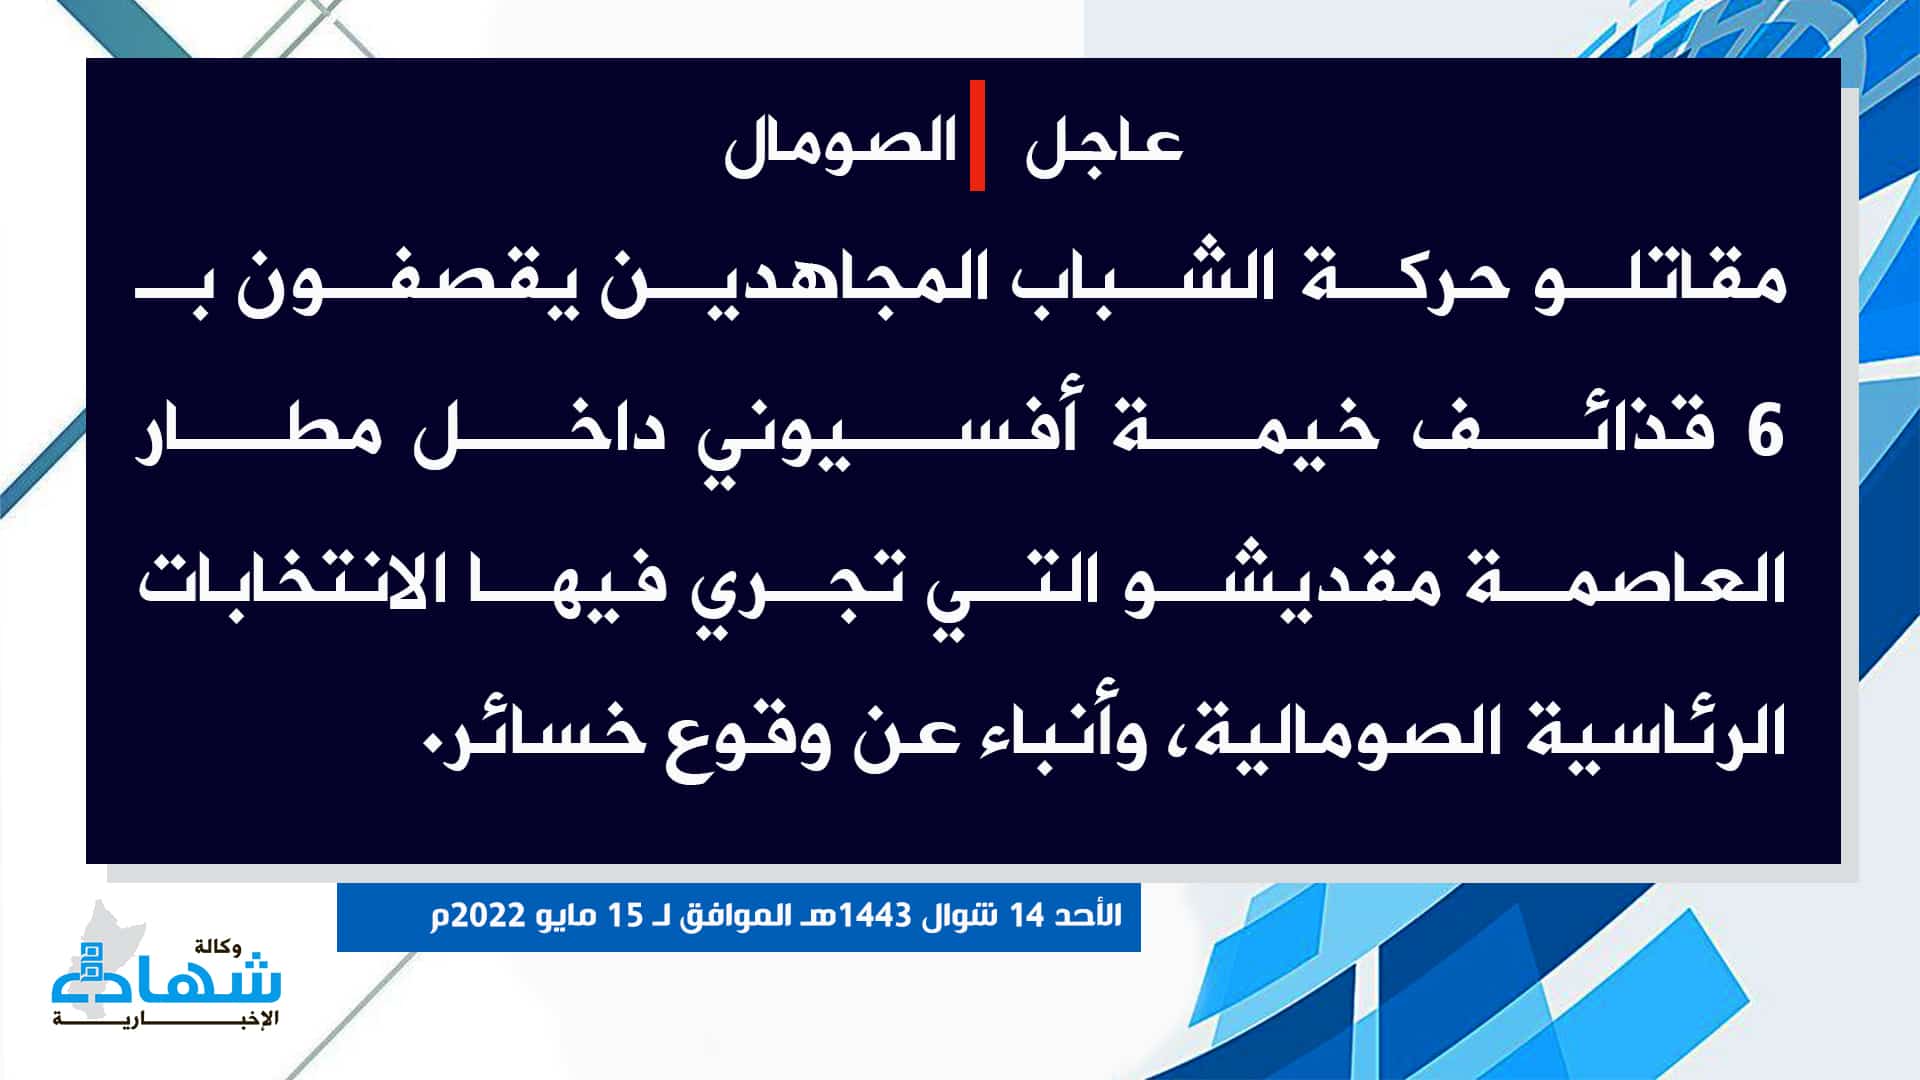 (Claim) al-Shabaab: Mujahideen Shelled Afsioni Camp With Six Missiles Where the Presidential Elections Are Taking Place Inside the Airport, Mogadishu, Somalia - 15 May 2022